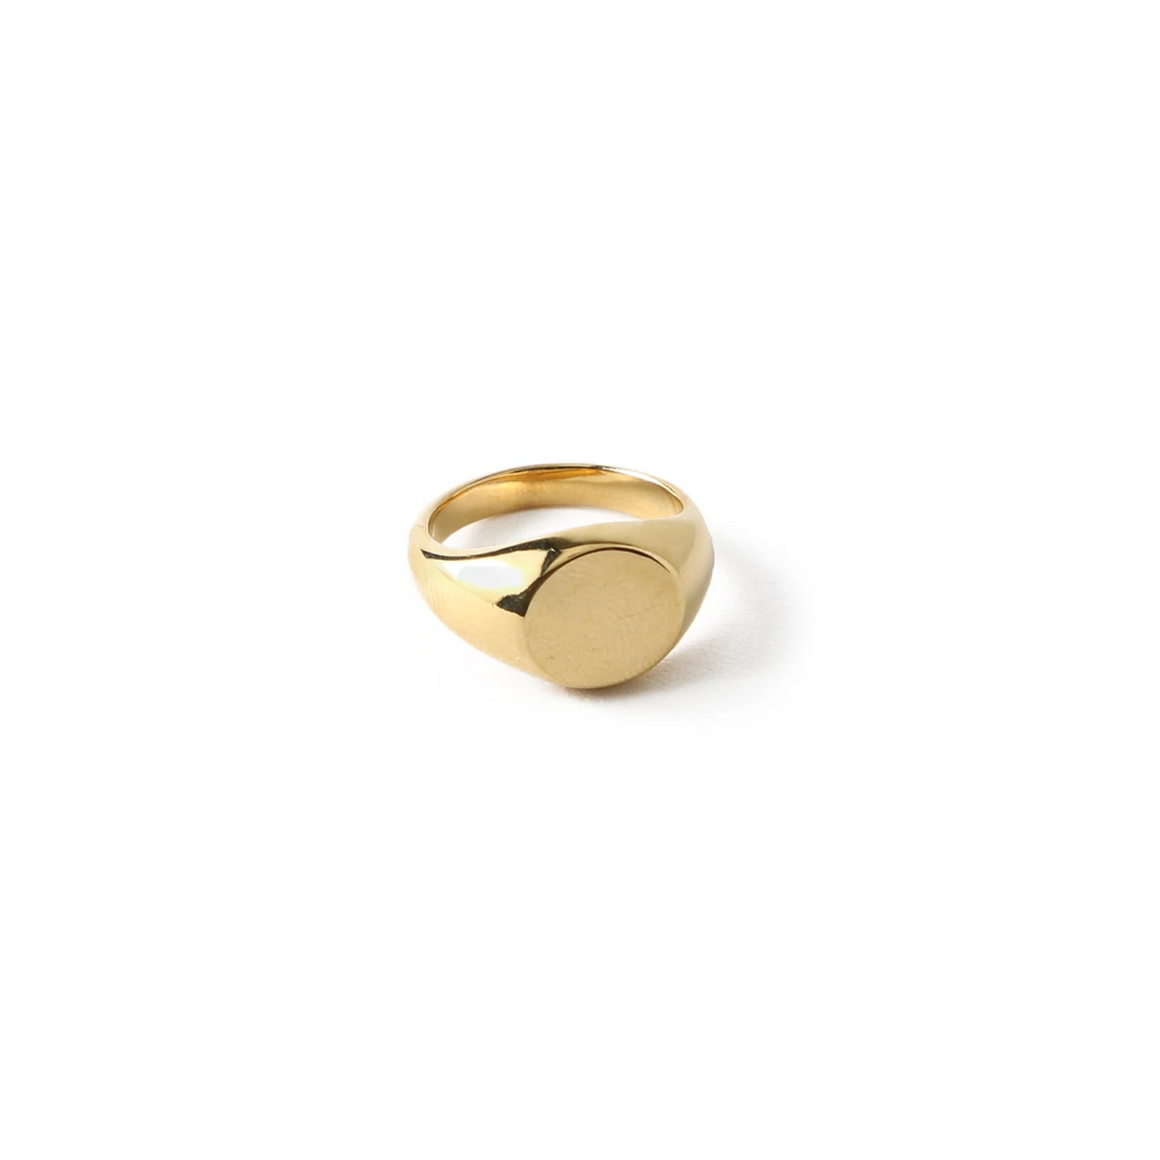 54 FLORAL CIRCLE FACE SIGNET RING - GOLD